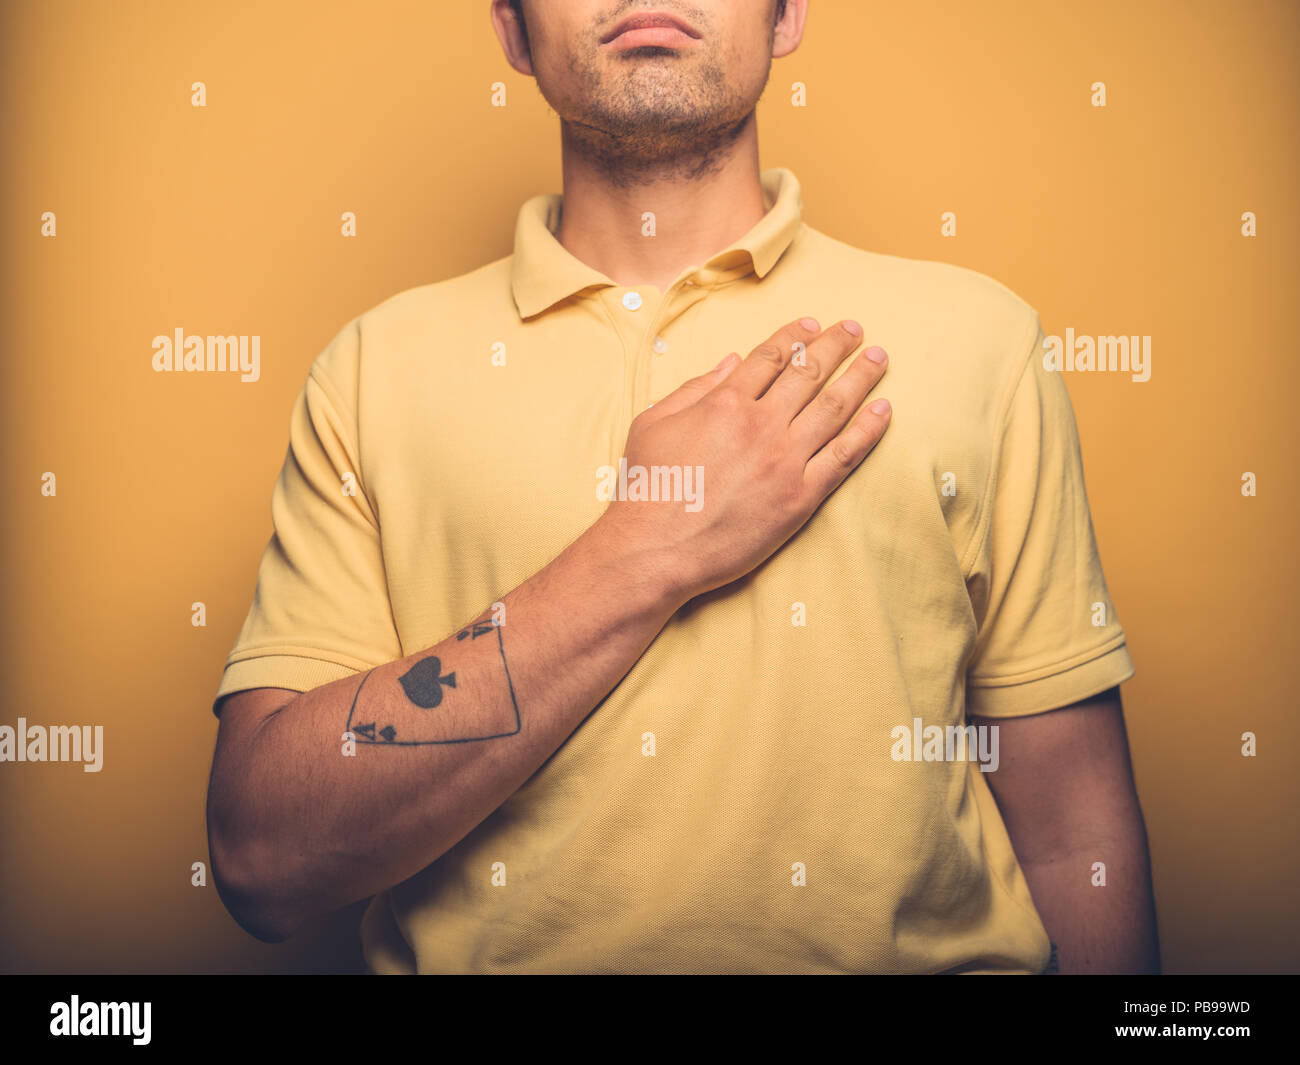 A young man is swearing allegiance with his hand on his chest Stock Photo